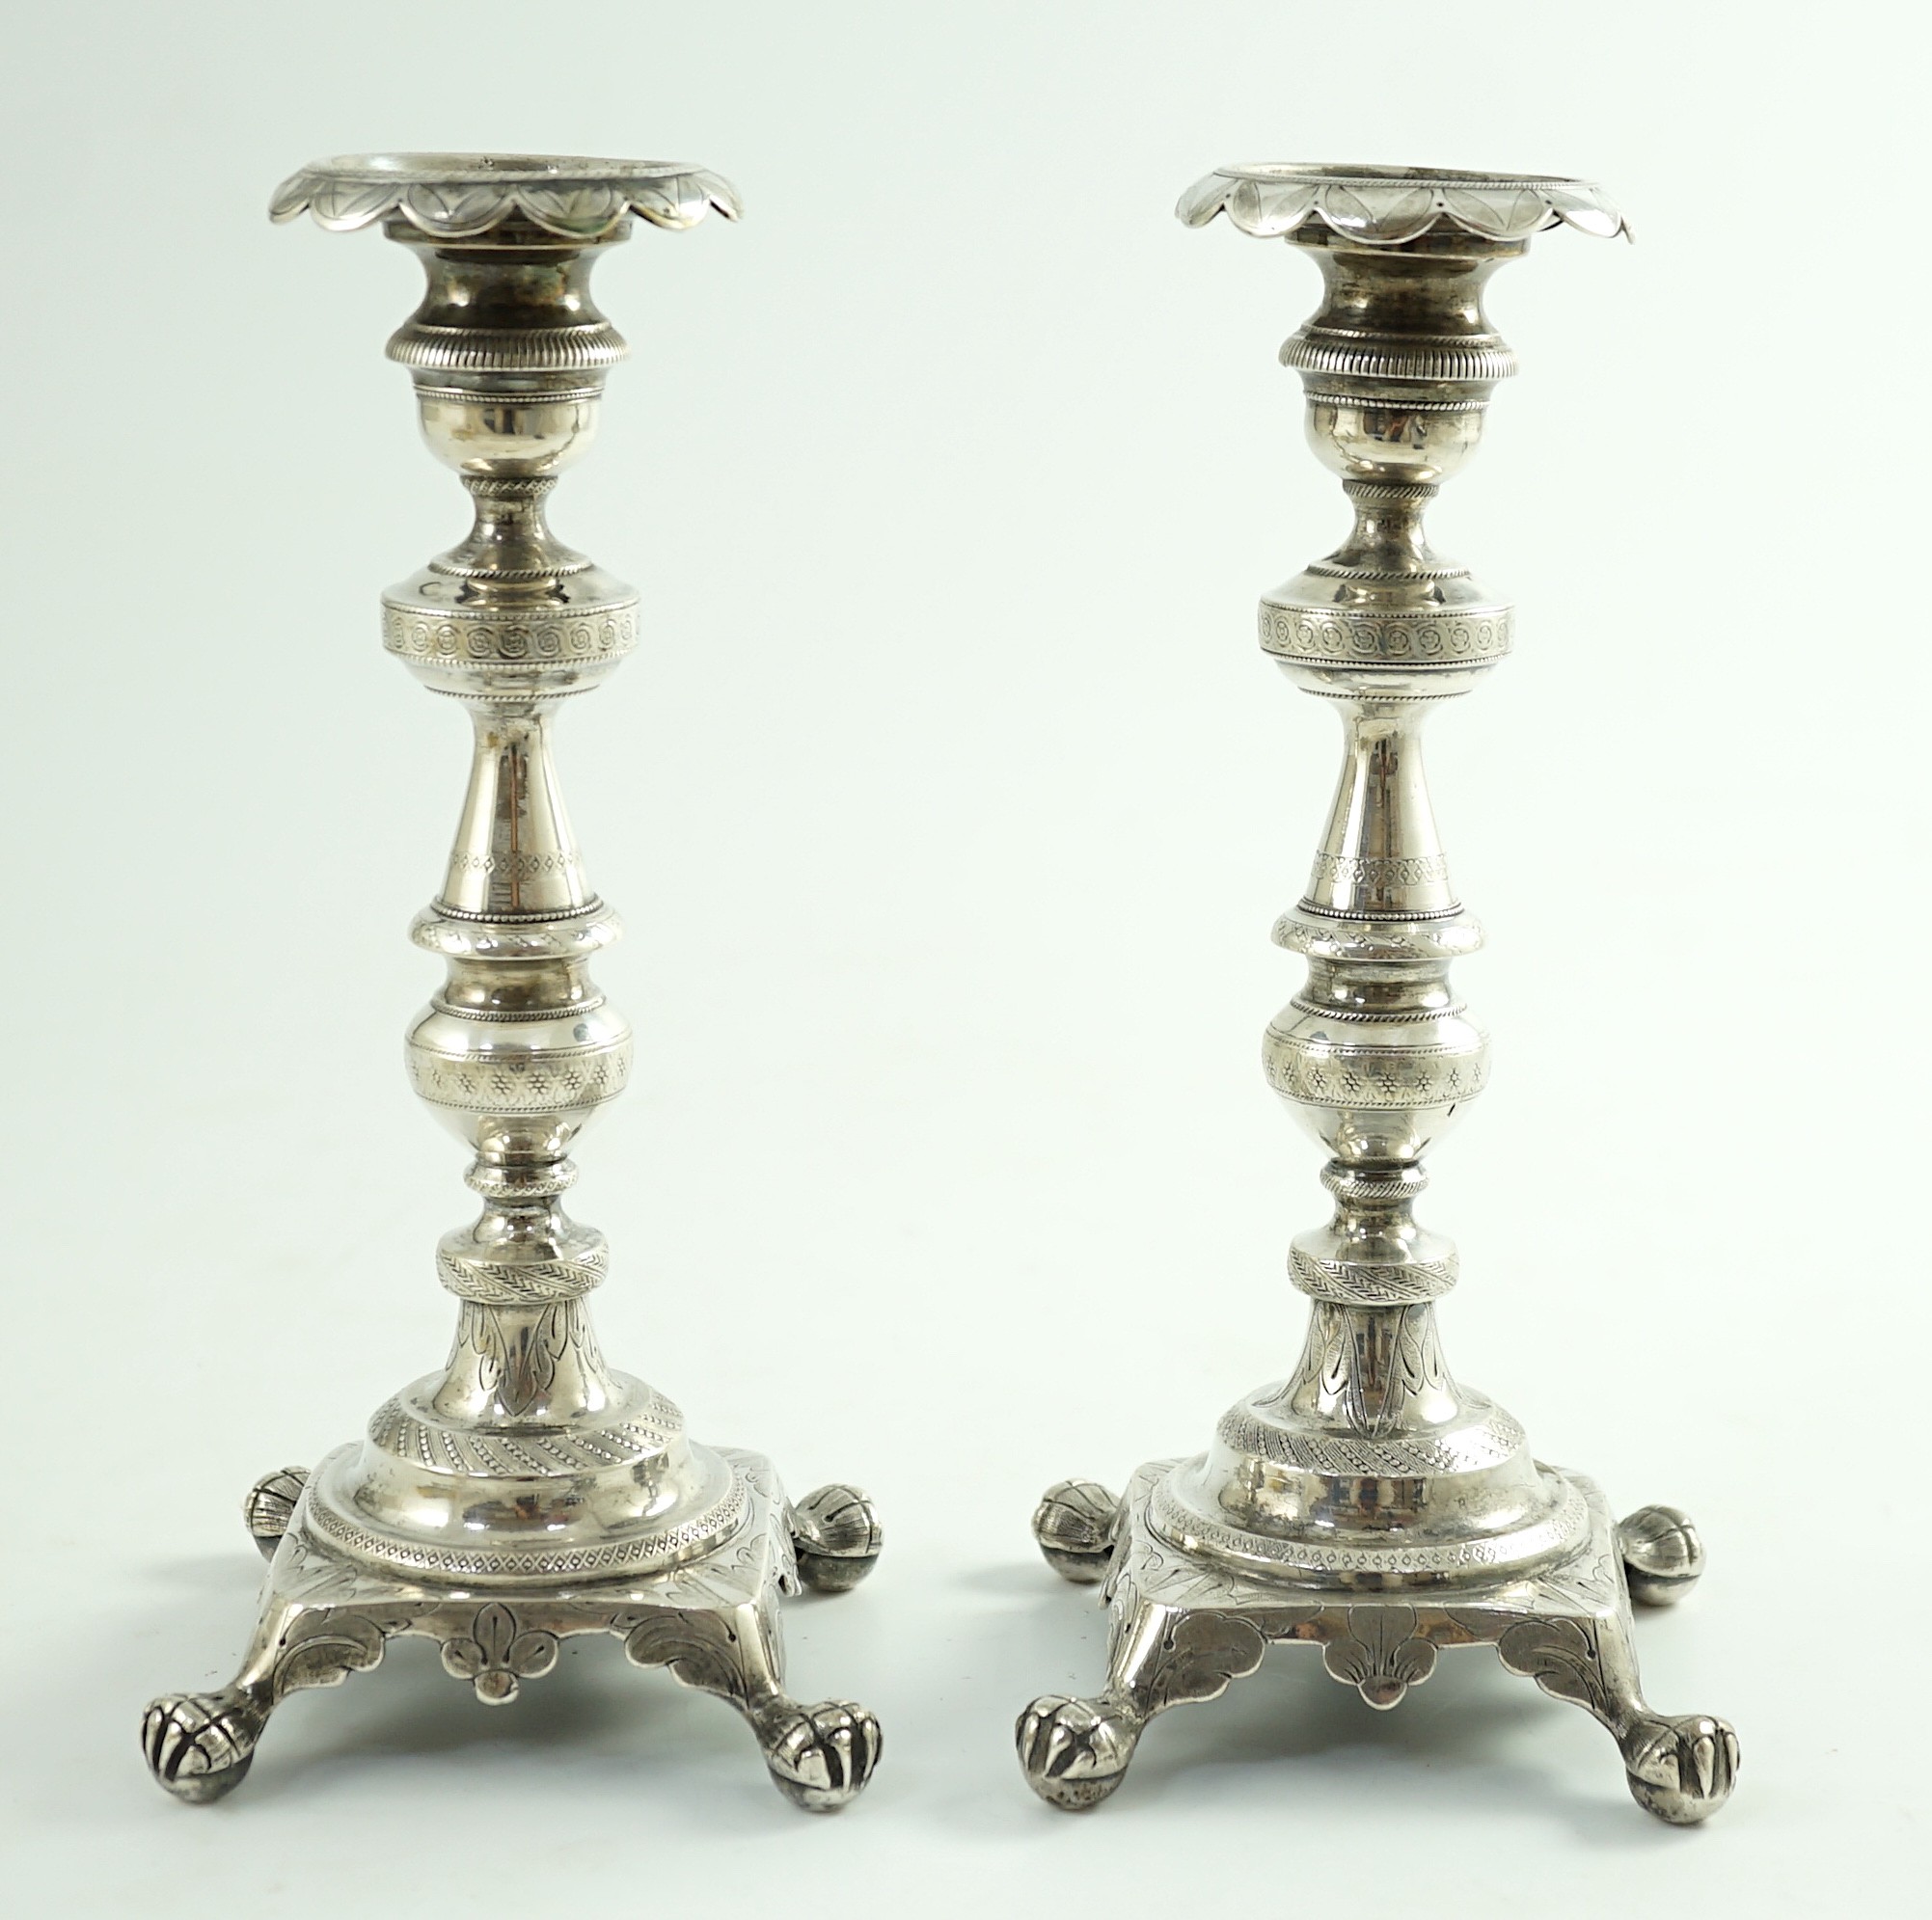 A pair of early 19th century Portuguese silver candlesticks